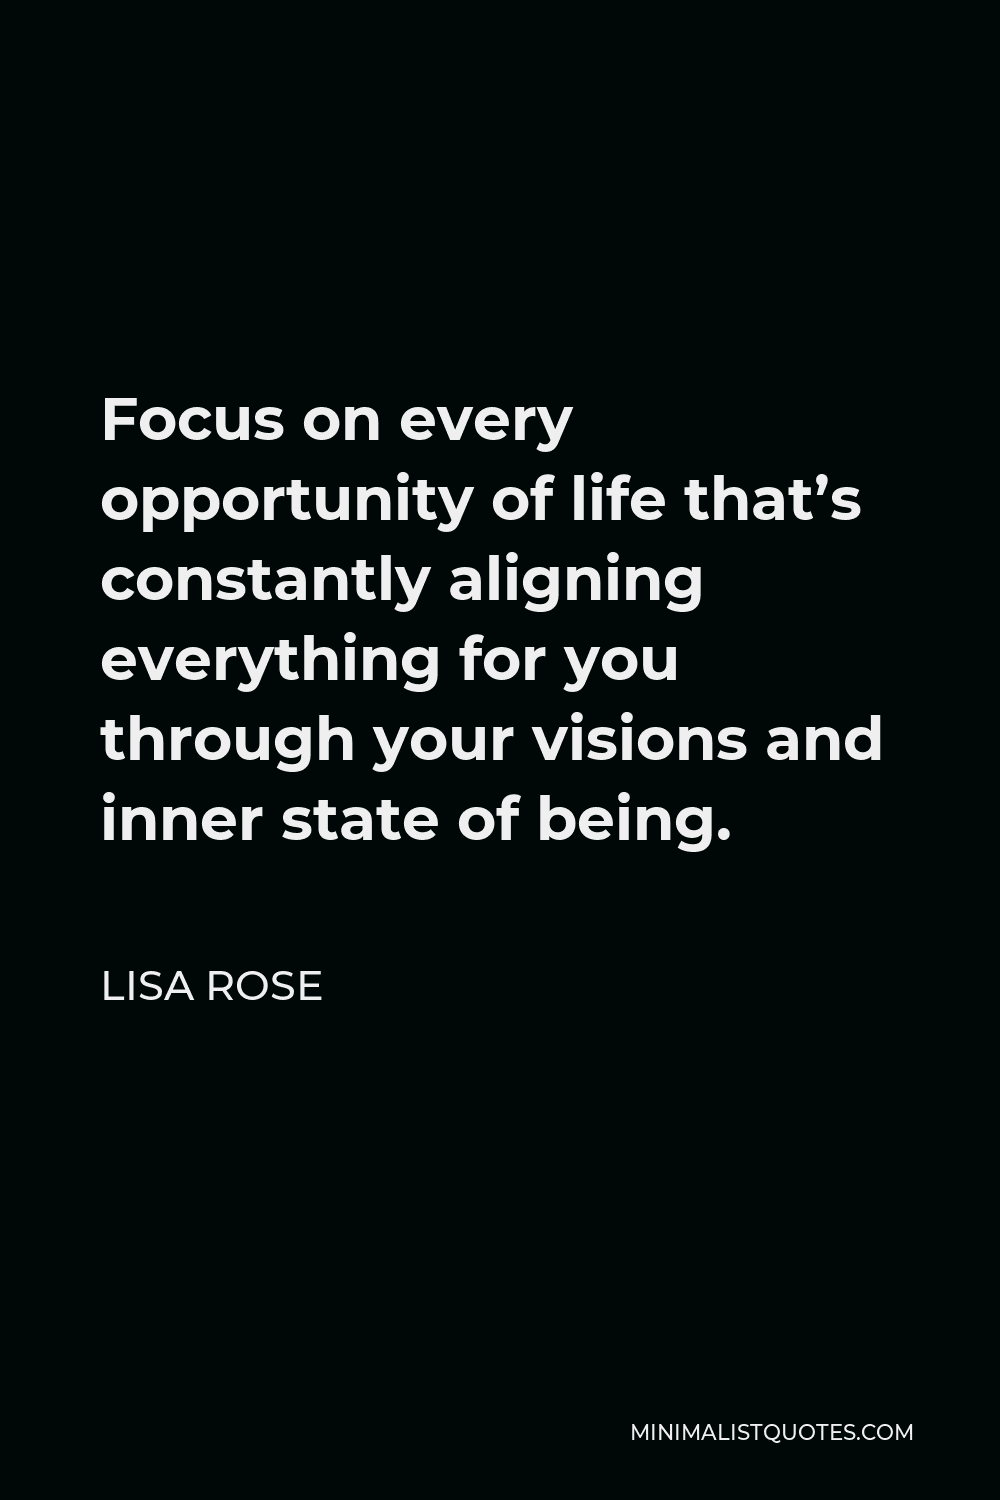 Lisa Rose Quote - Focus on every opportunity of life that’s constantly aligning everything for you through your visions and inner state of being.